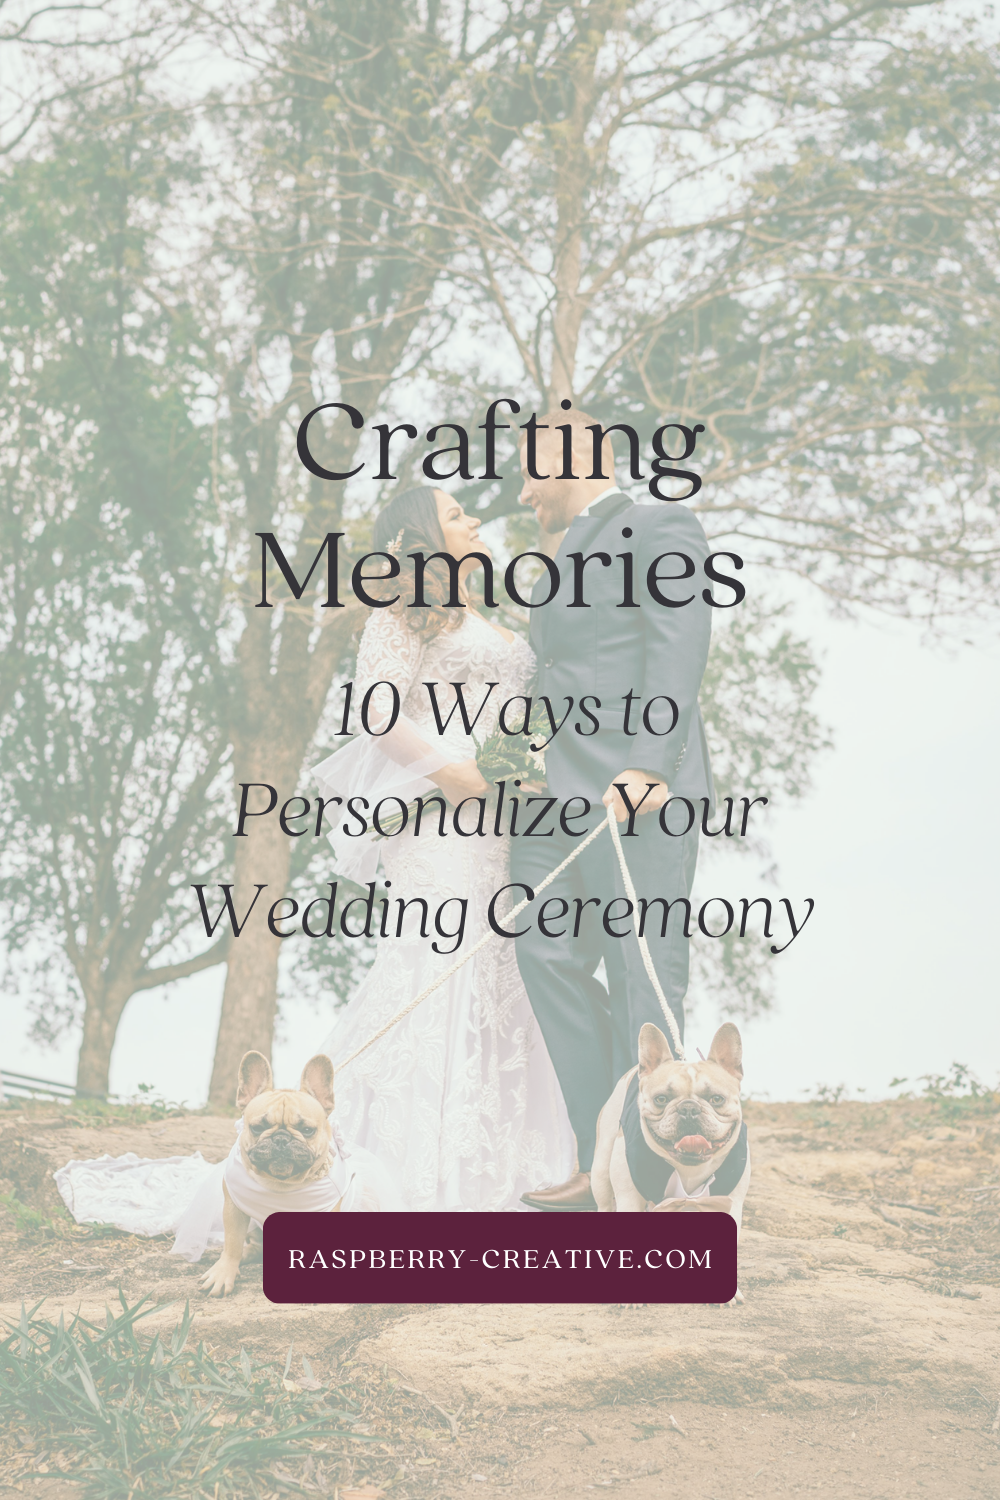 Crafting Memories: 10 Ways to Personalize Your Wedding Ceremony​